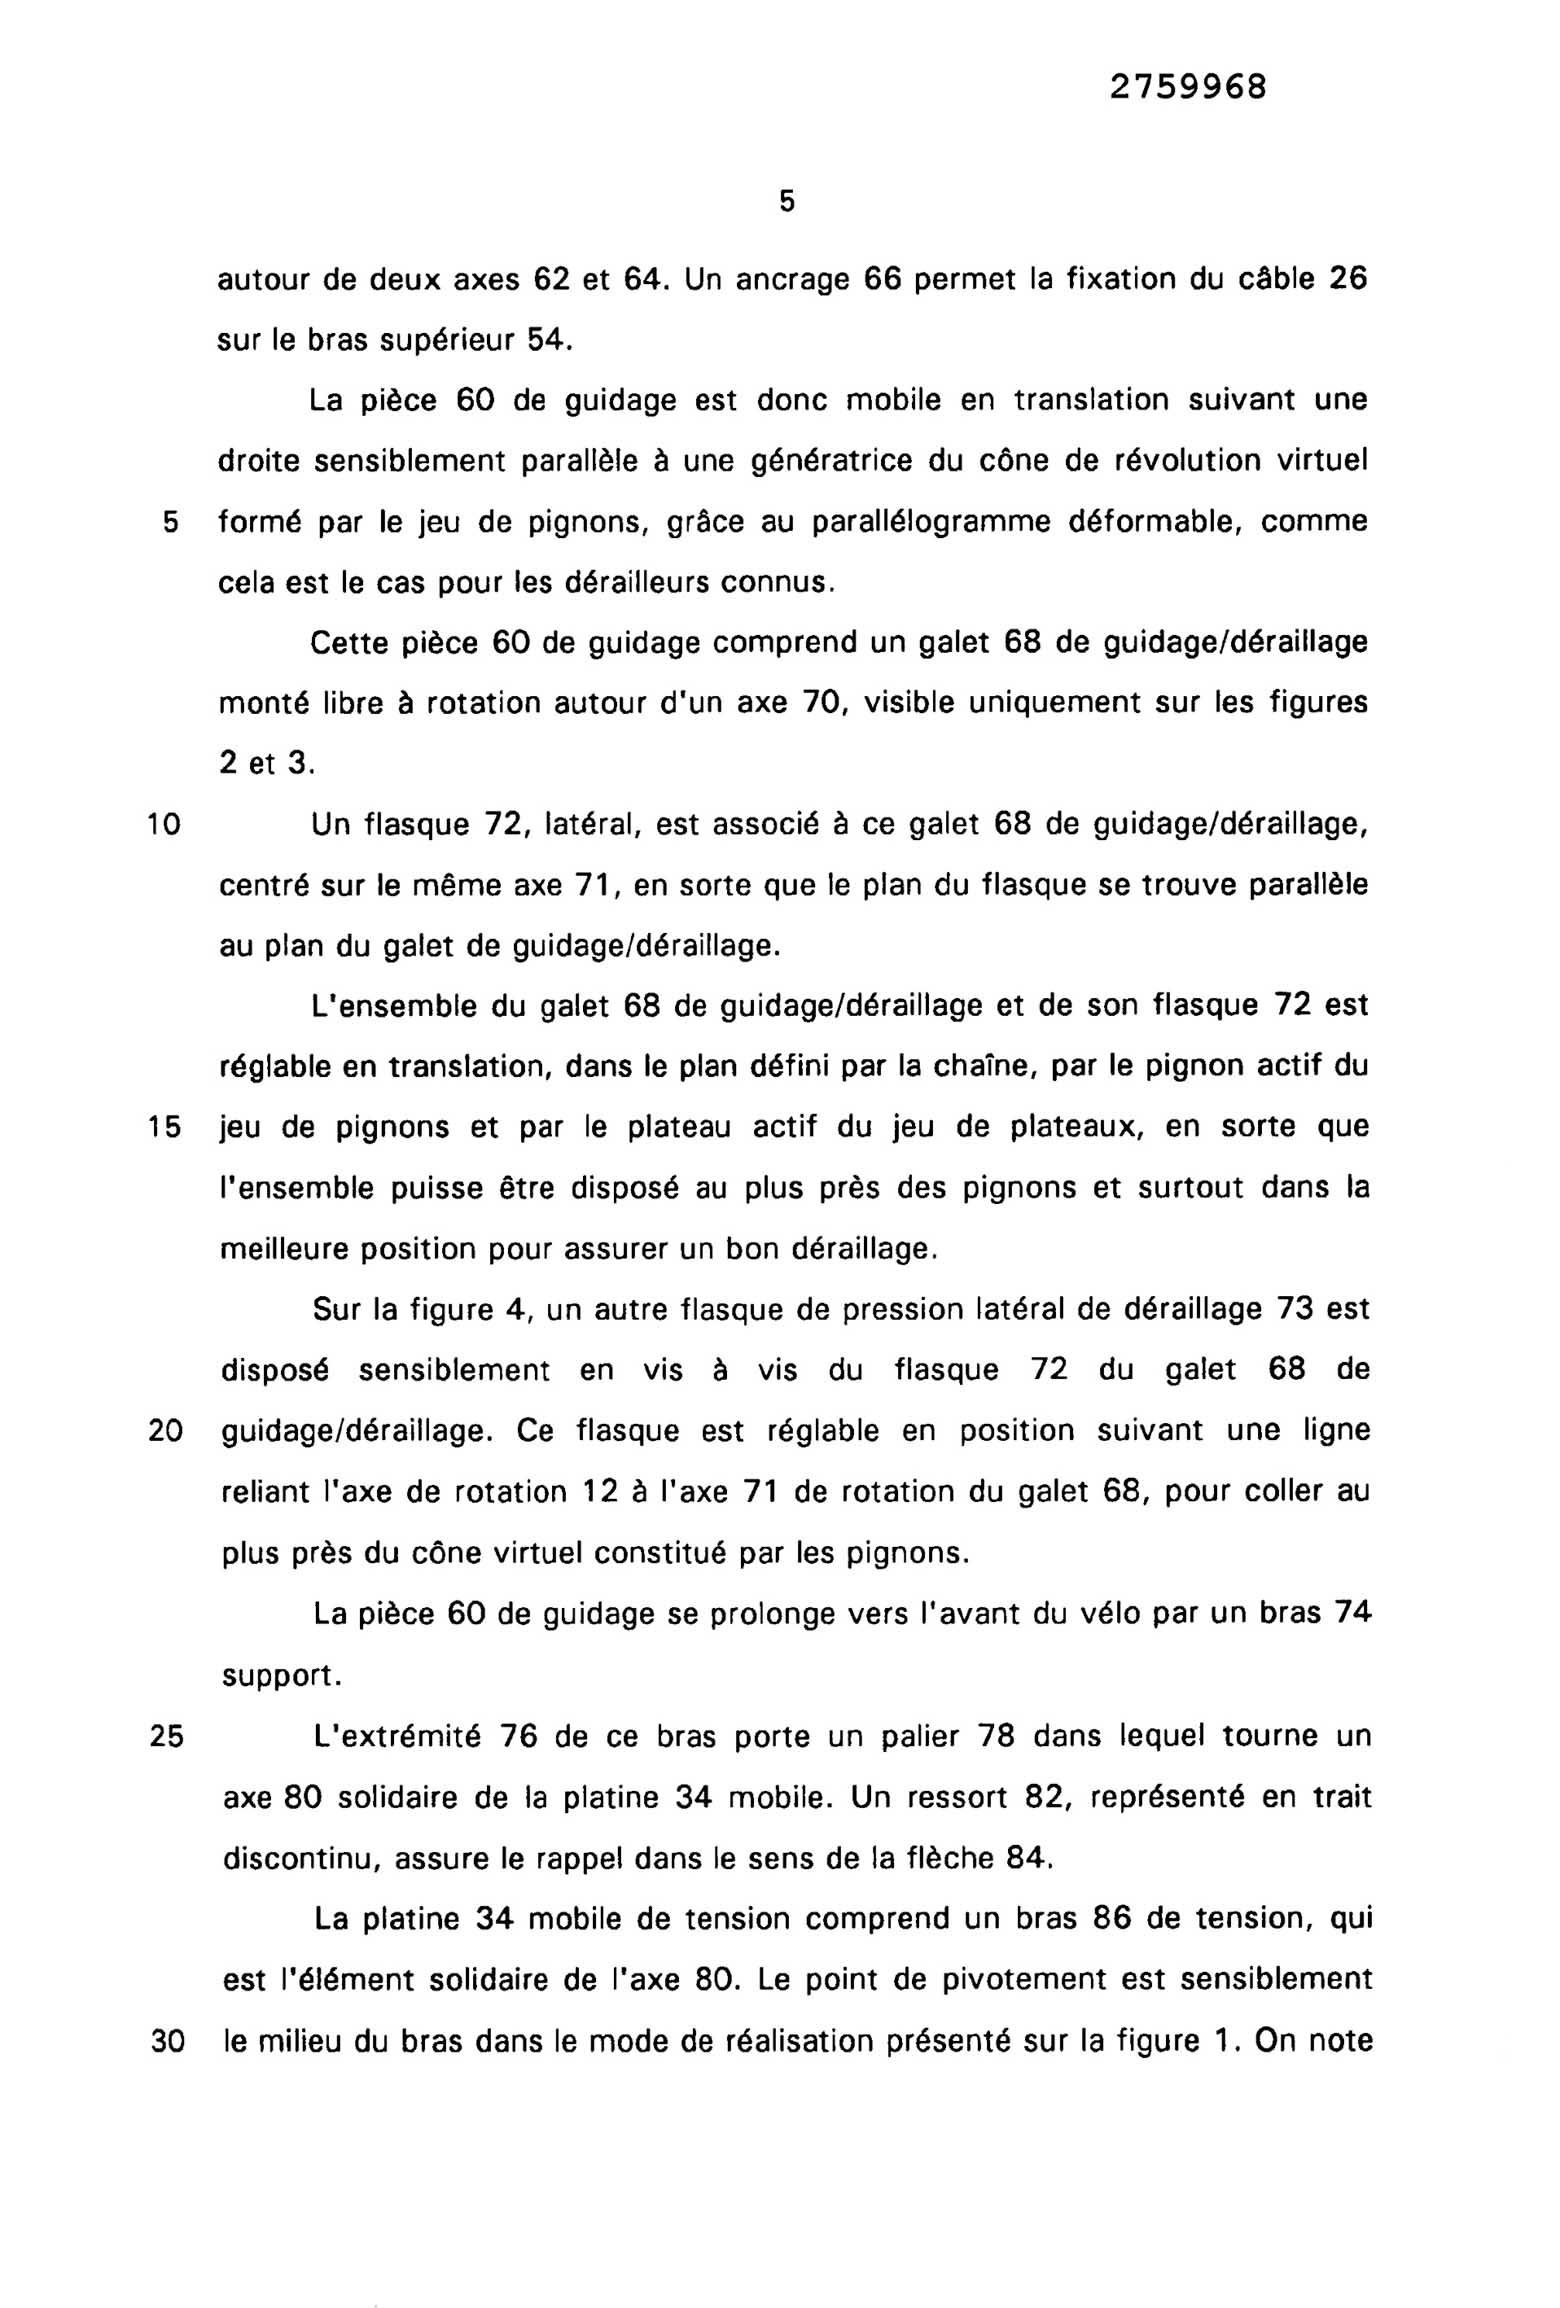 French Patent 2,759,968 - EGS scan 6 main image